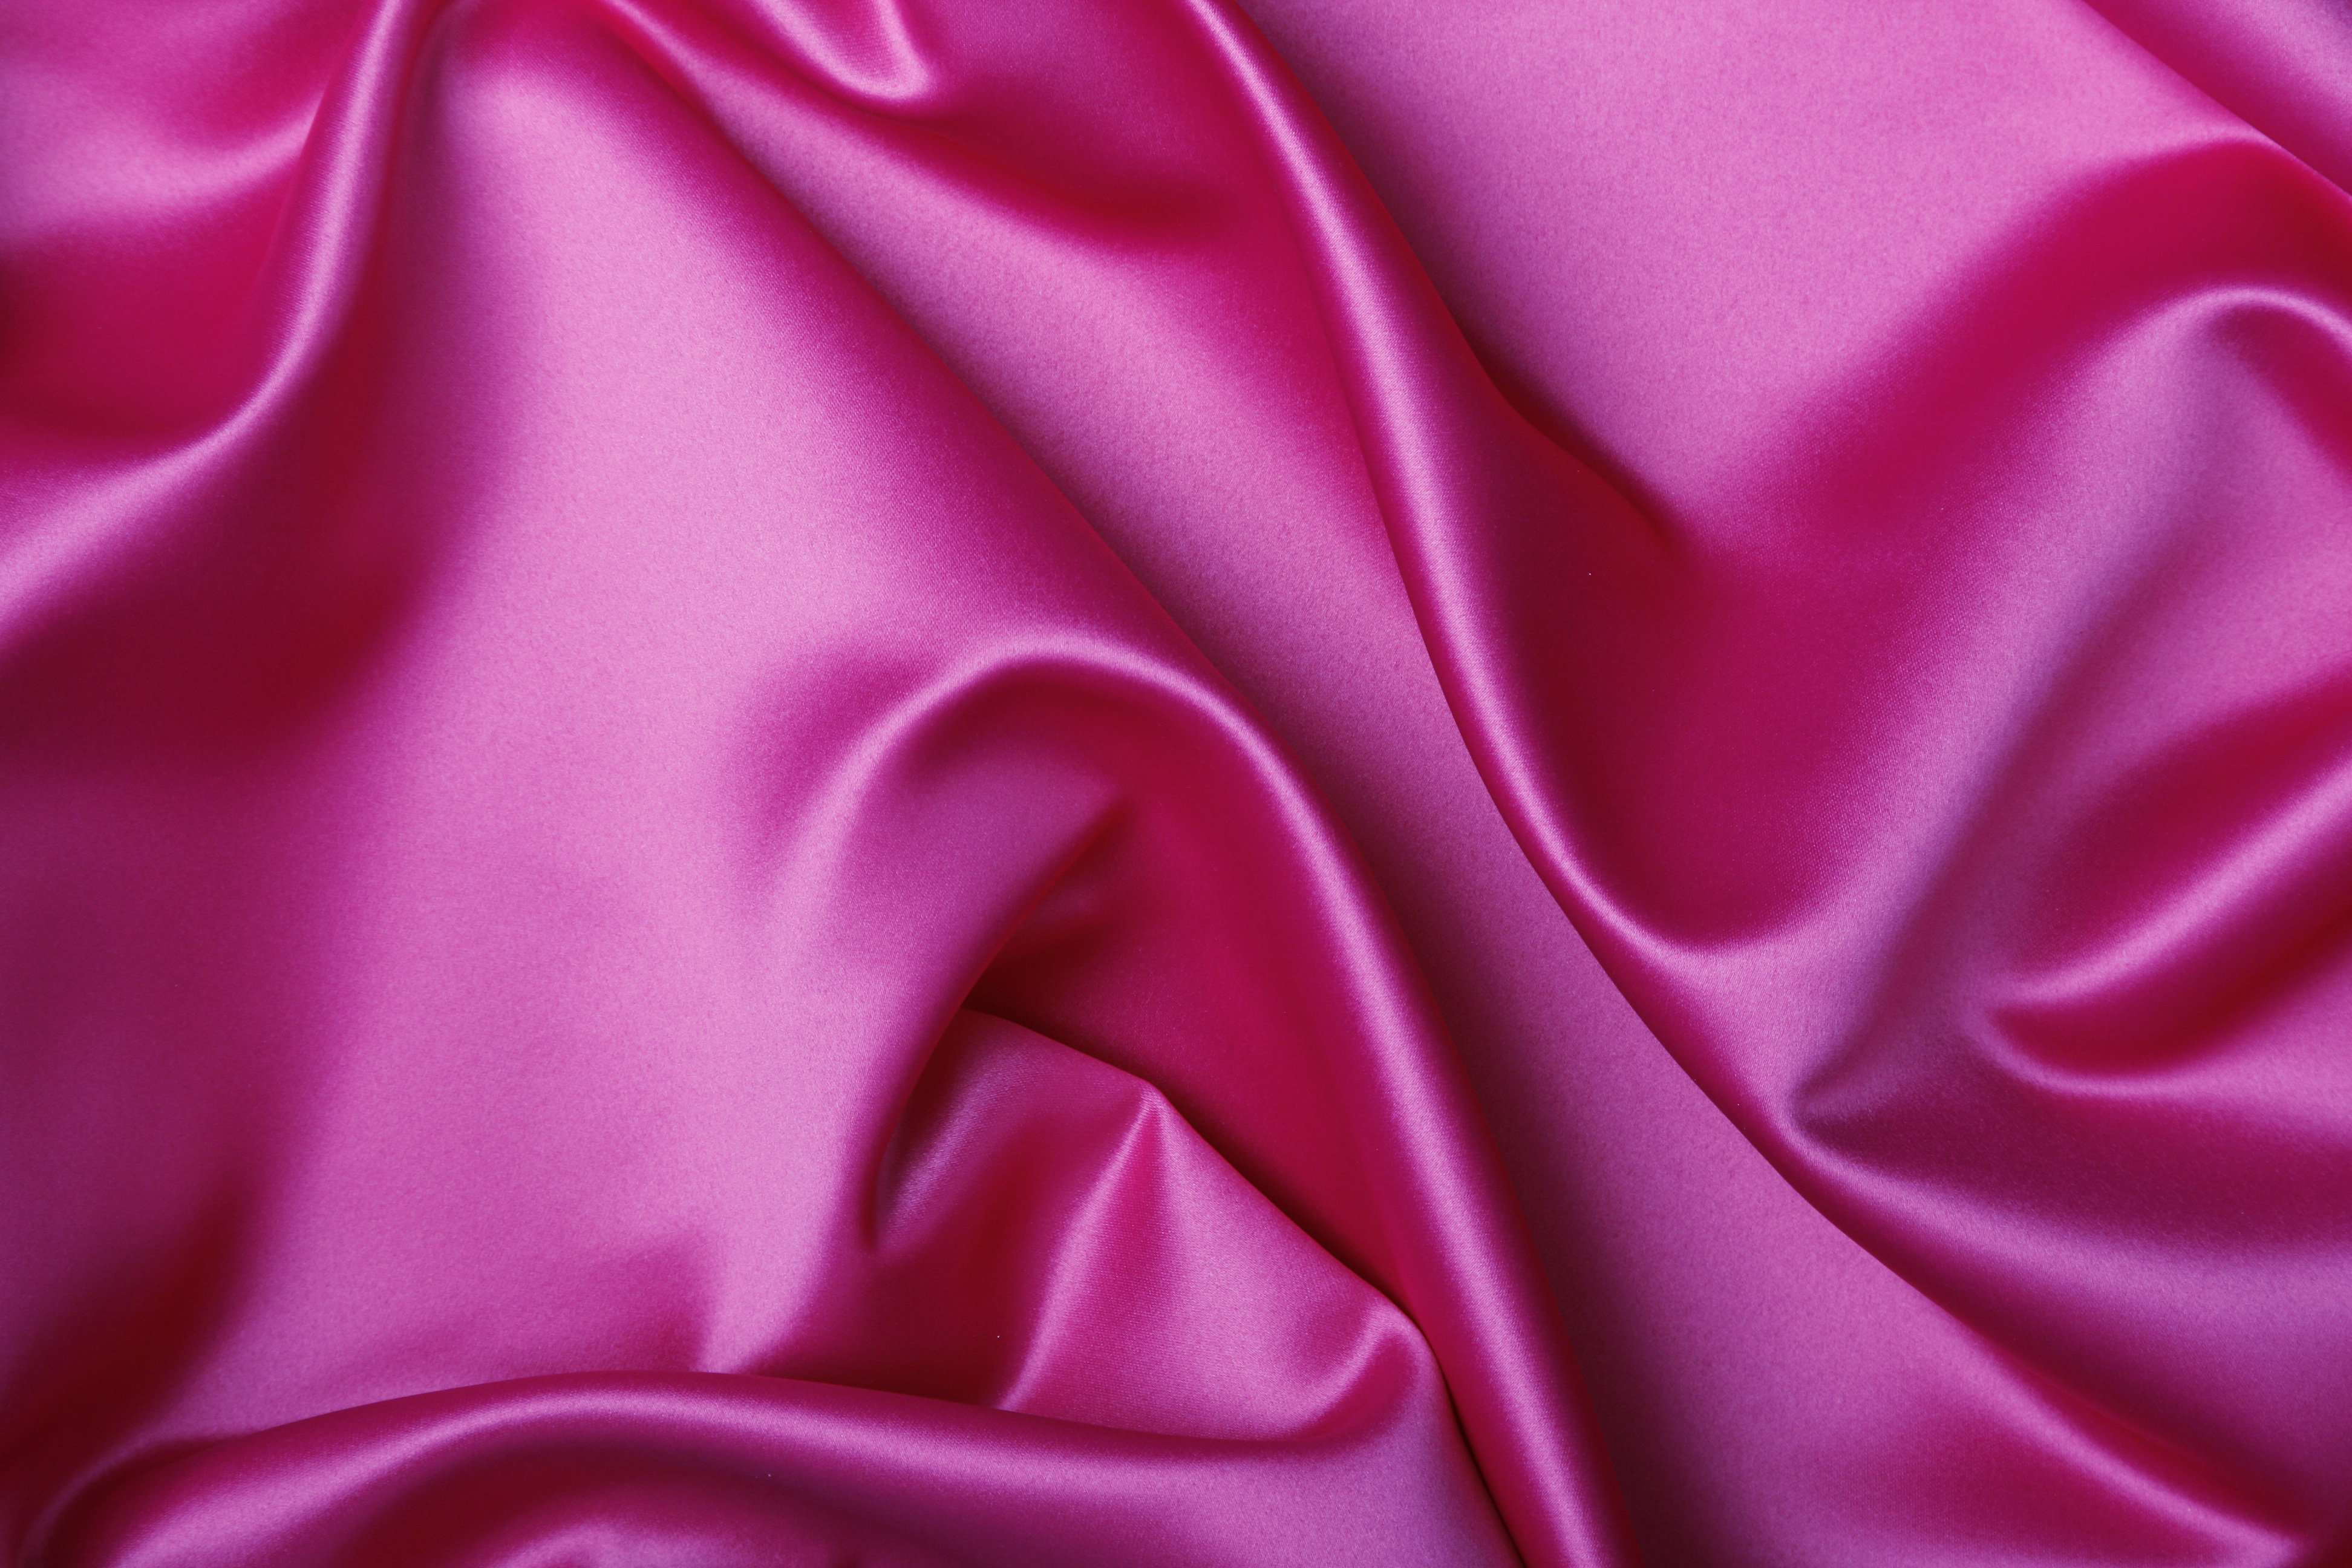 High End Silk Pink Satin Background Wallpaper Image For Free